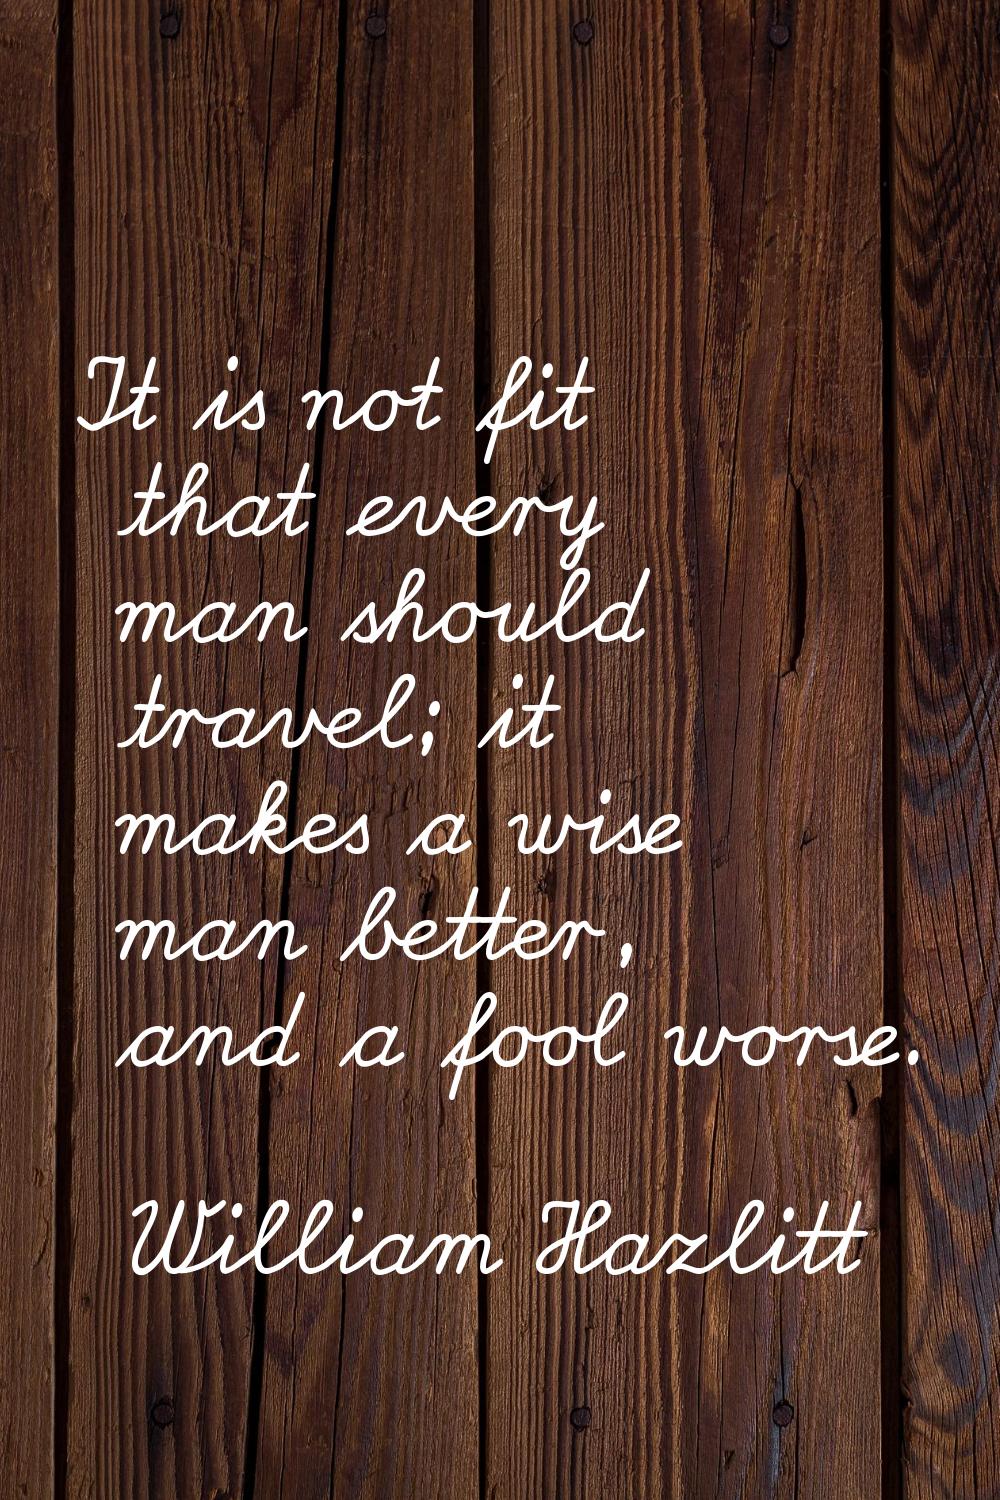 It is not fit that every man should travel; it makes a wise man better, and a fool worse.